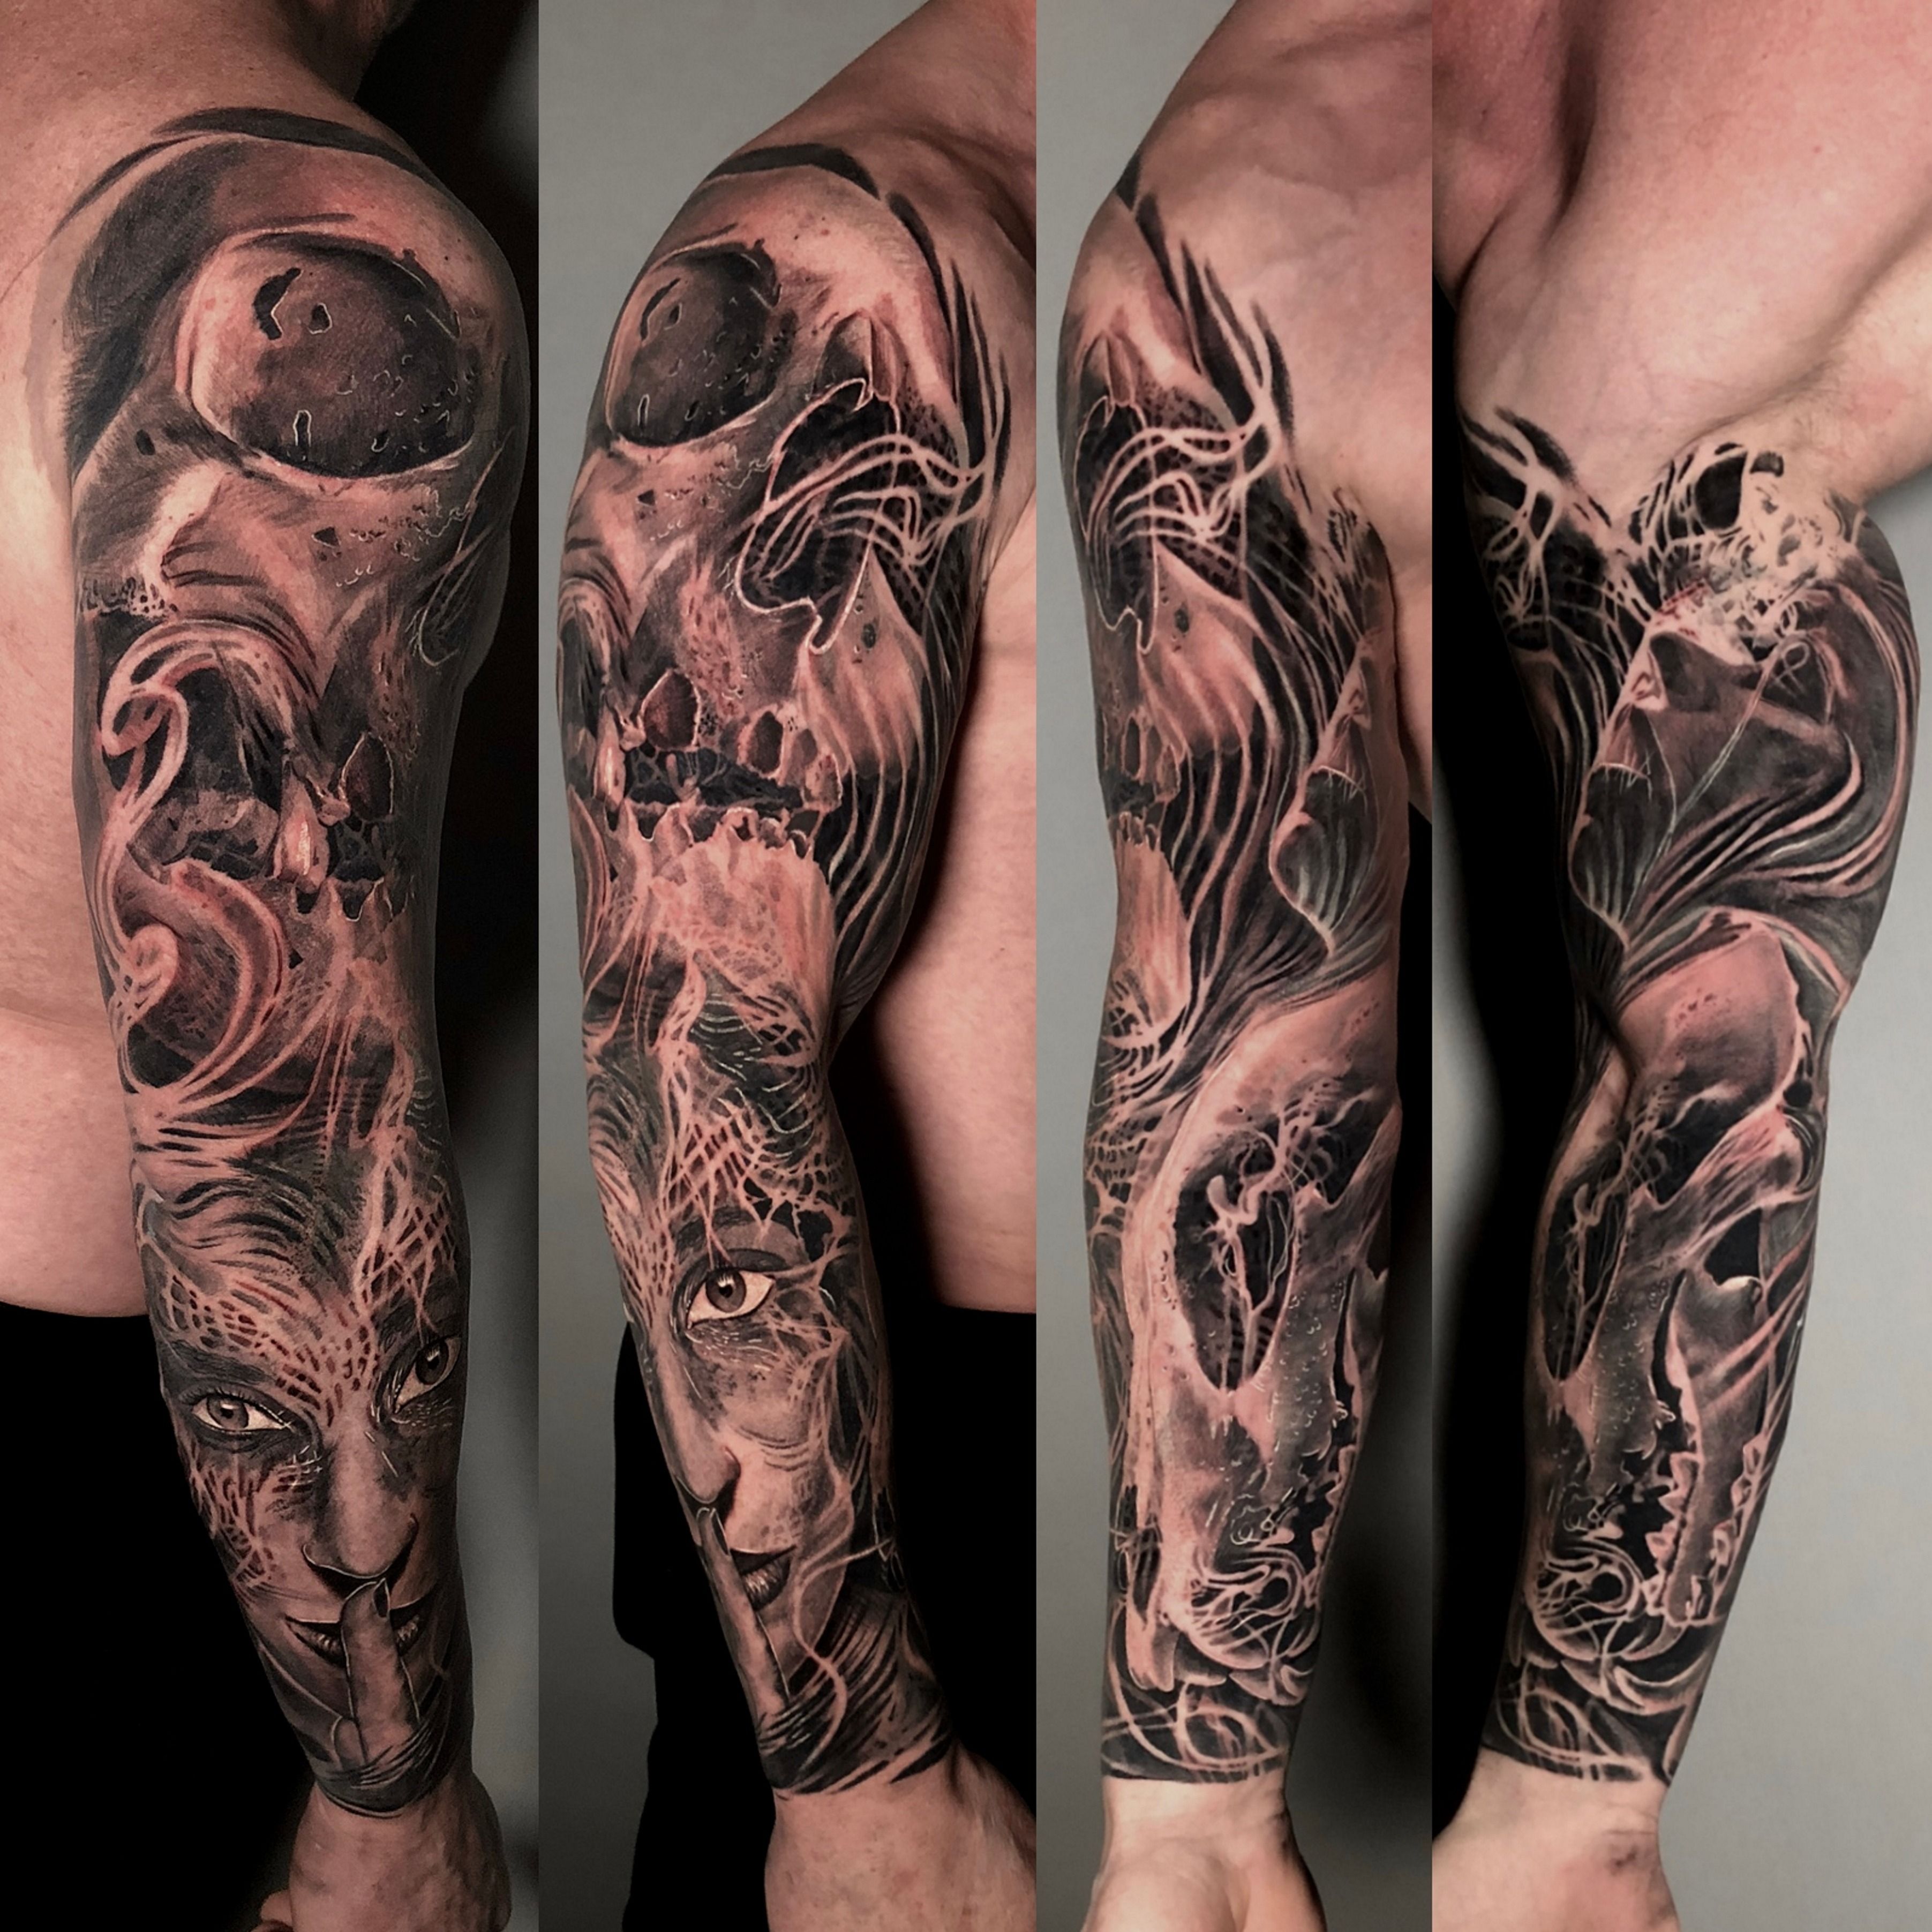 Tattoos for Men and Women  Etsy  Best sleeve tattoos Arm sleeve tattoos  Full sleeve tattoos